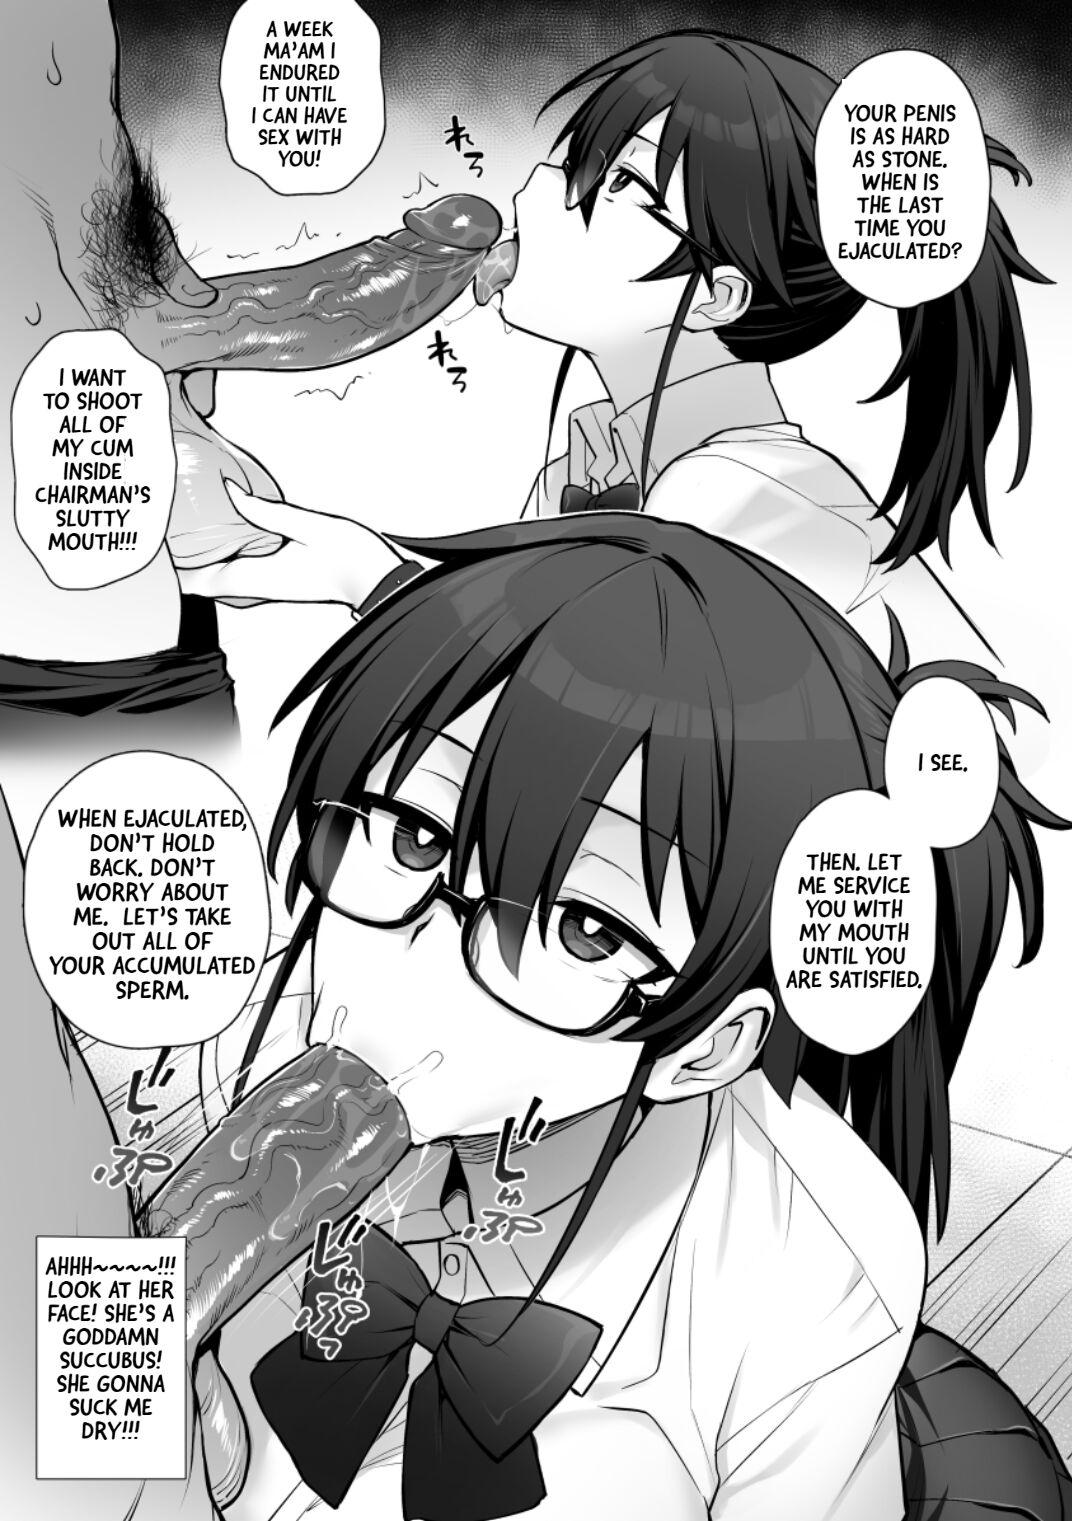 Bath Rumor Has It That The New Chairman of Disciplinary Committee Has Huge Breasts. Animation - Page 10